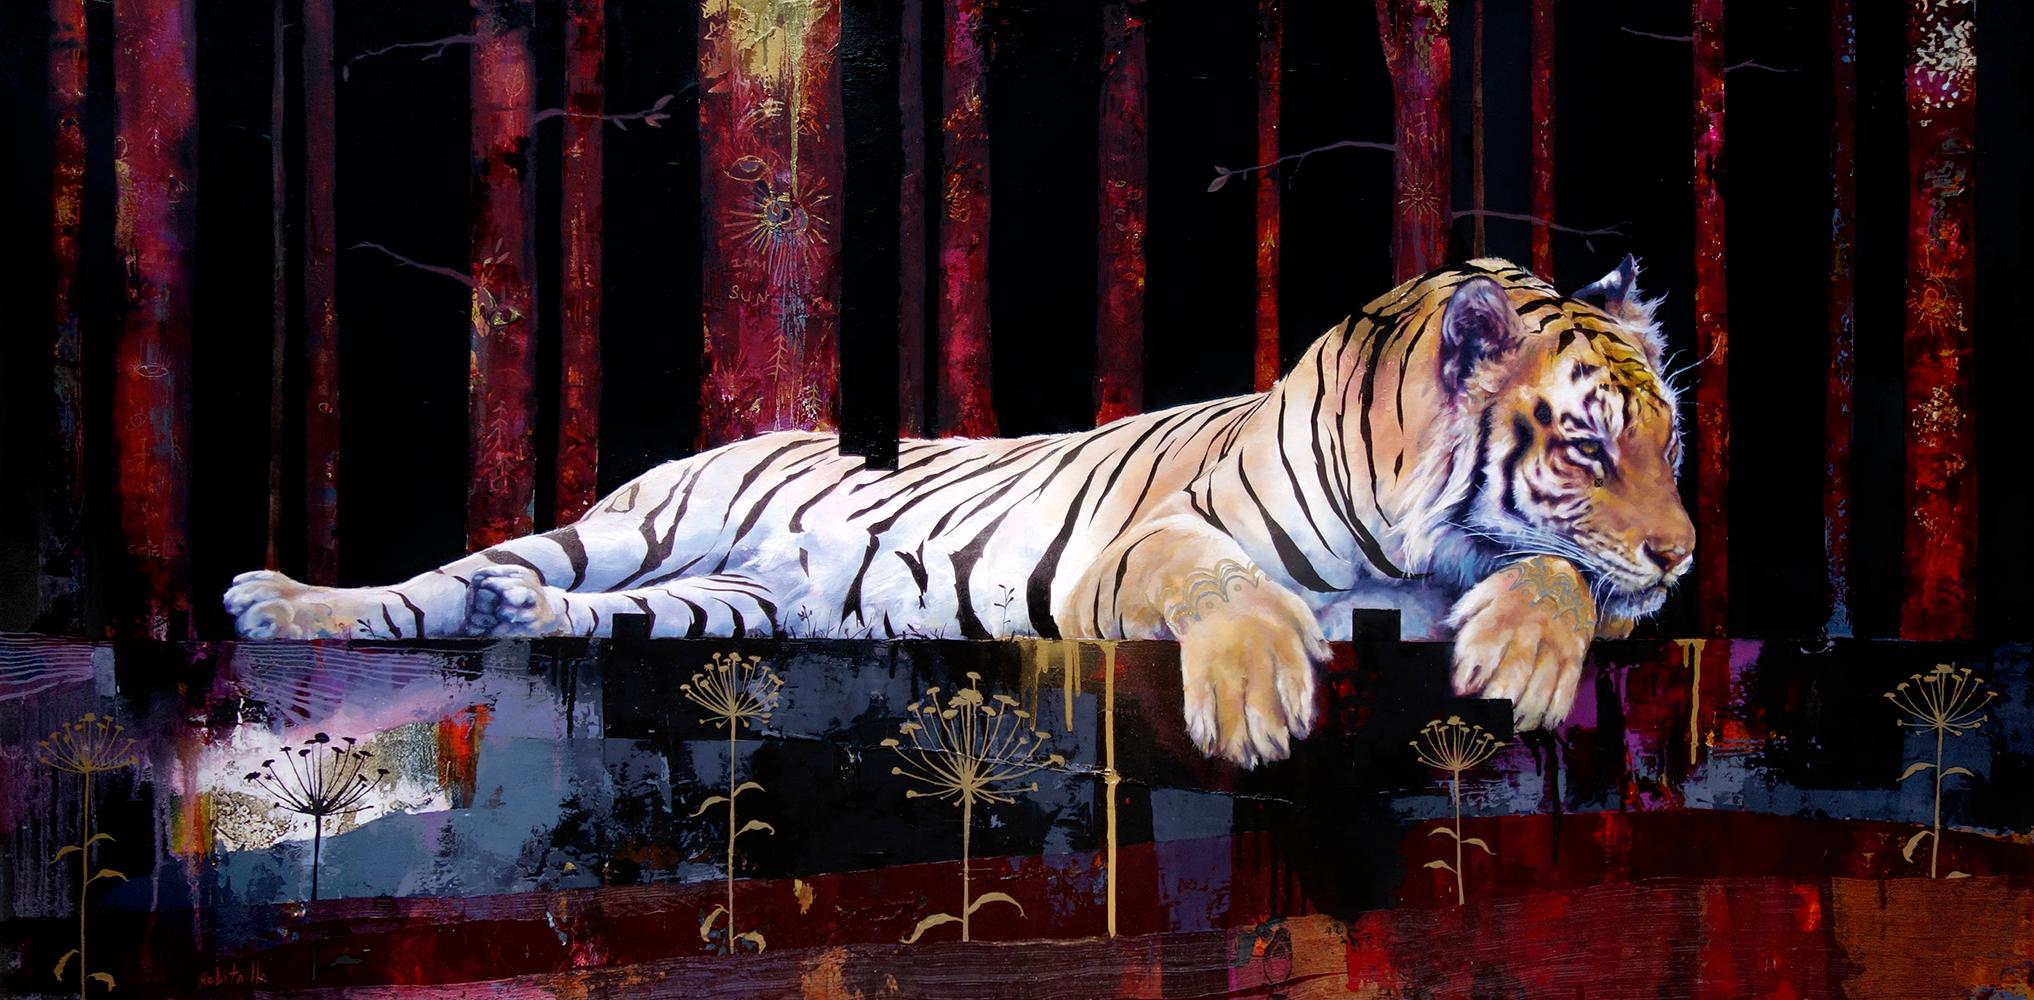 Eric Robitaille Abstract Painting - Nocturnal Synchronisation, Tiger oil painting, abstract realism, layered texture